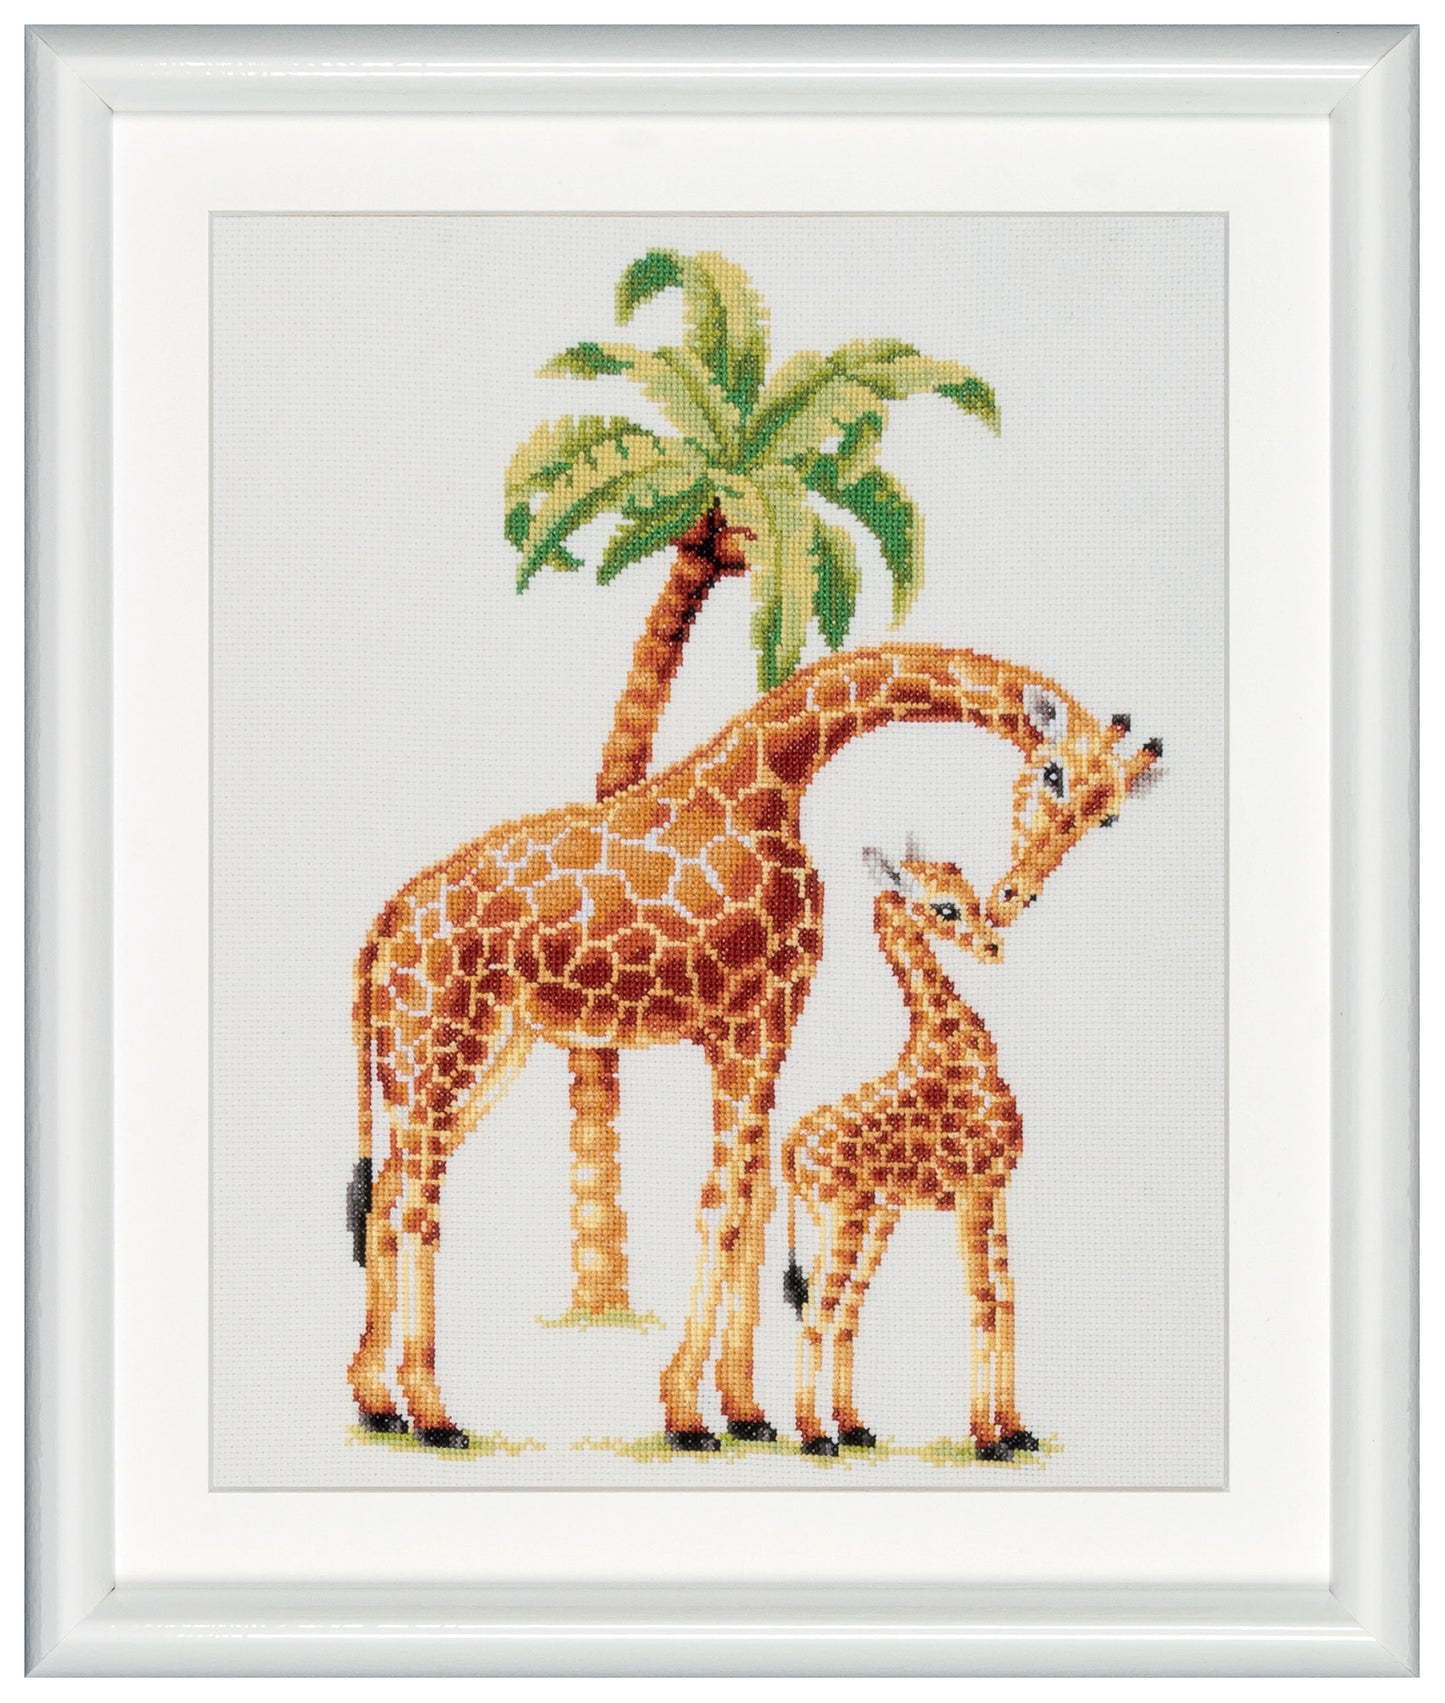 Sharpen your embroidery skills with this well-assorted embroidery kit that features a wonderful and adorable design. A giraffe cuddling a baby giraffe. This scene highlights even more through the contrast of a bright palm tree. Light and dark brown tones come together to form this cute design. DSB cross stitch kits have easy to follow design charts and contain all items needed to facilitate embroidery without hassle. To cater to both beginners as well as advanced stitching artists.